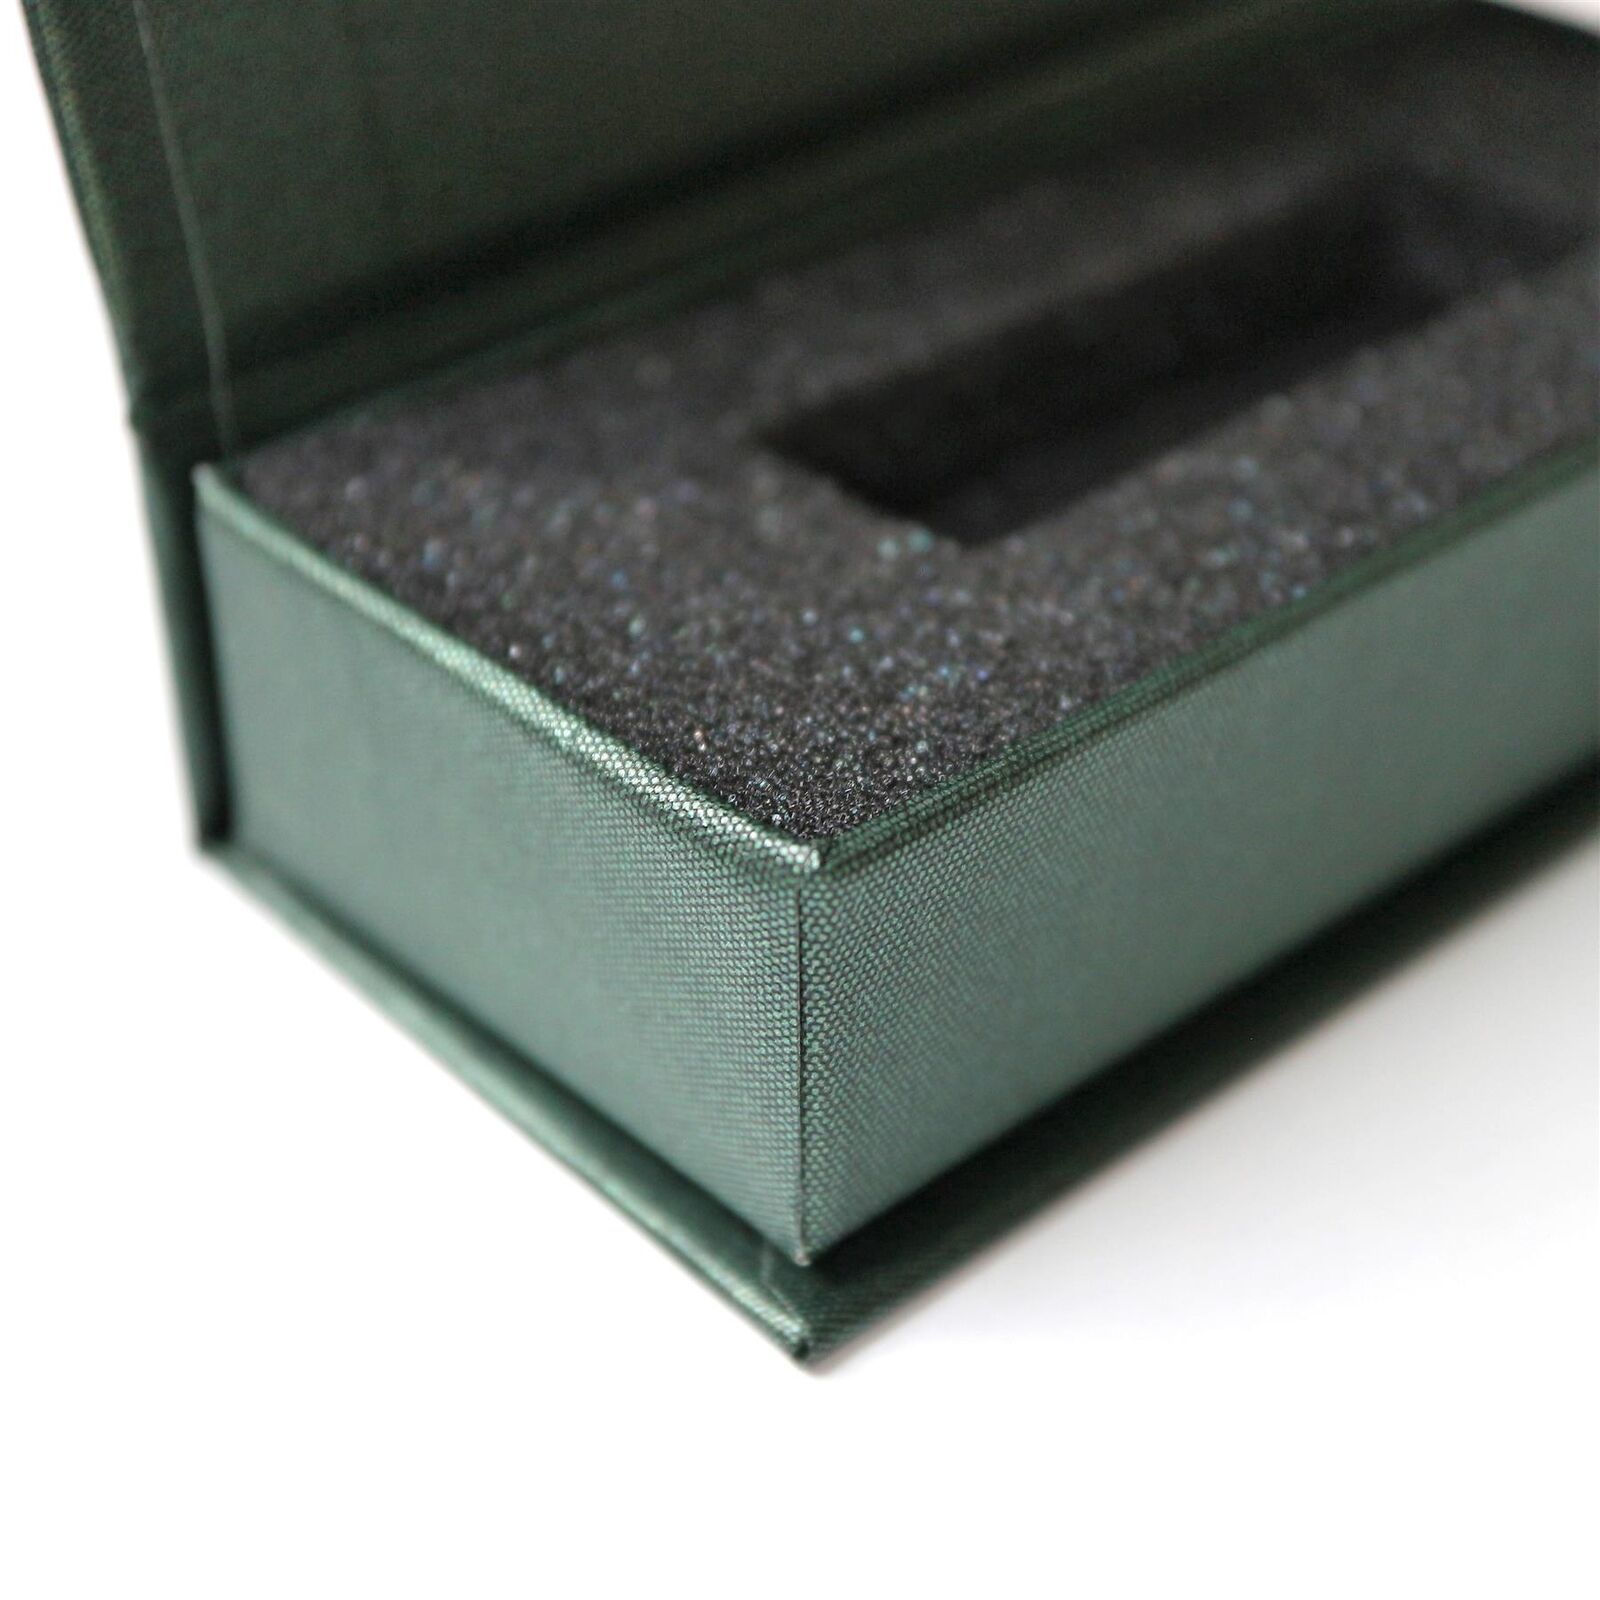 Primary image for 4x Magnetic USB Presentation Gift Boxes, Sage Green, flash drives